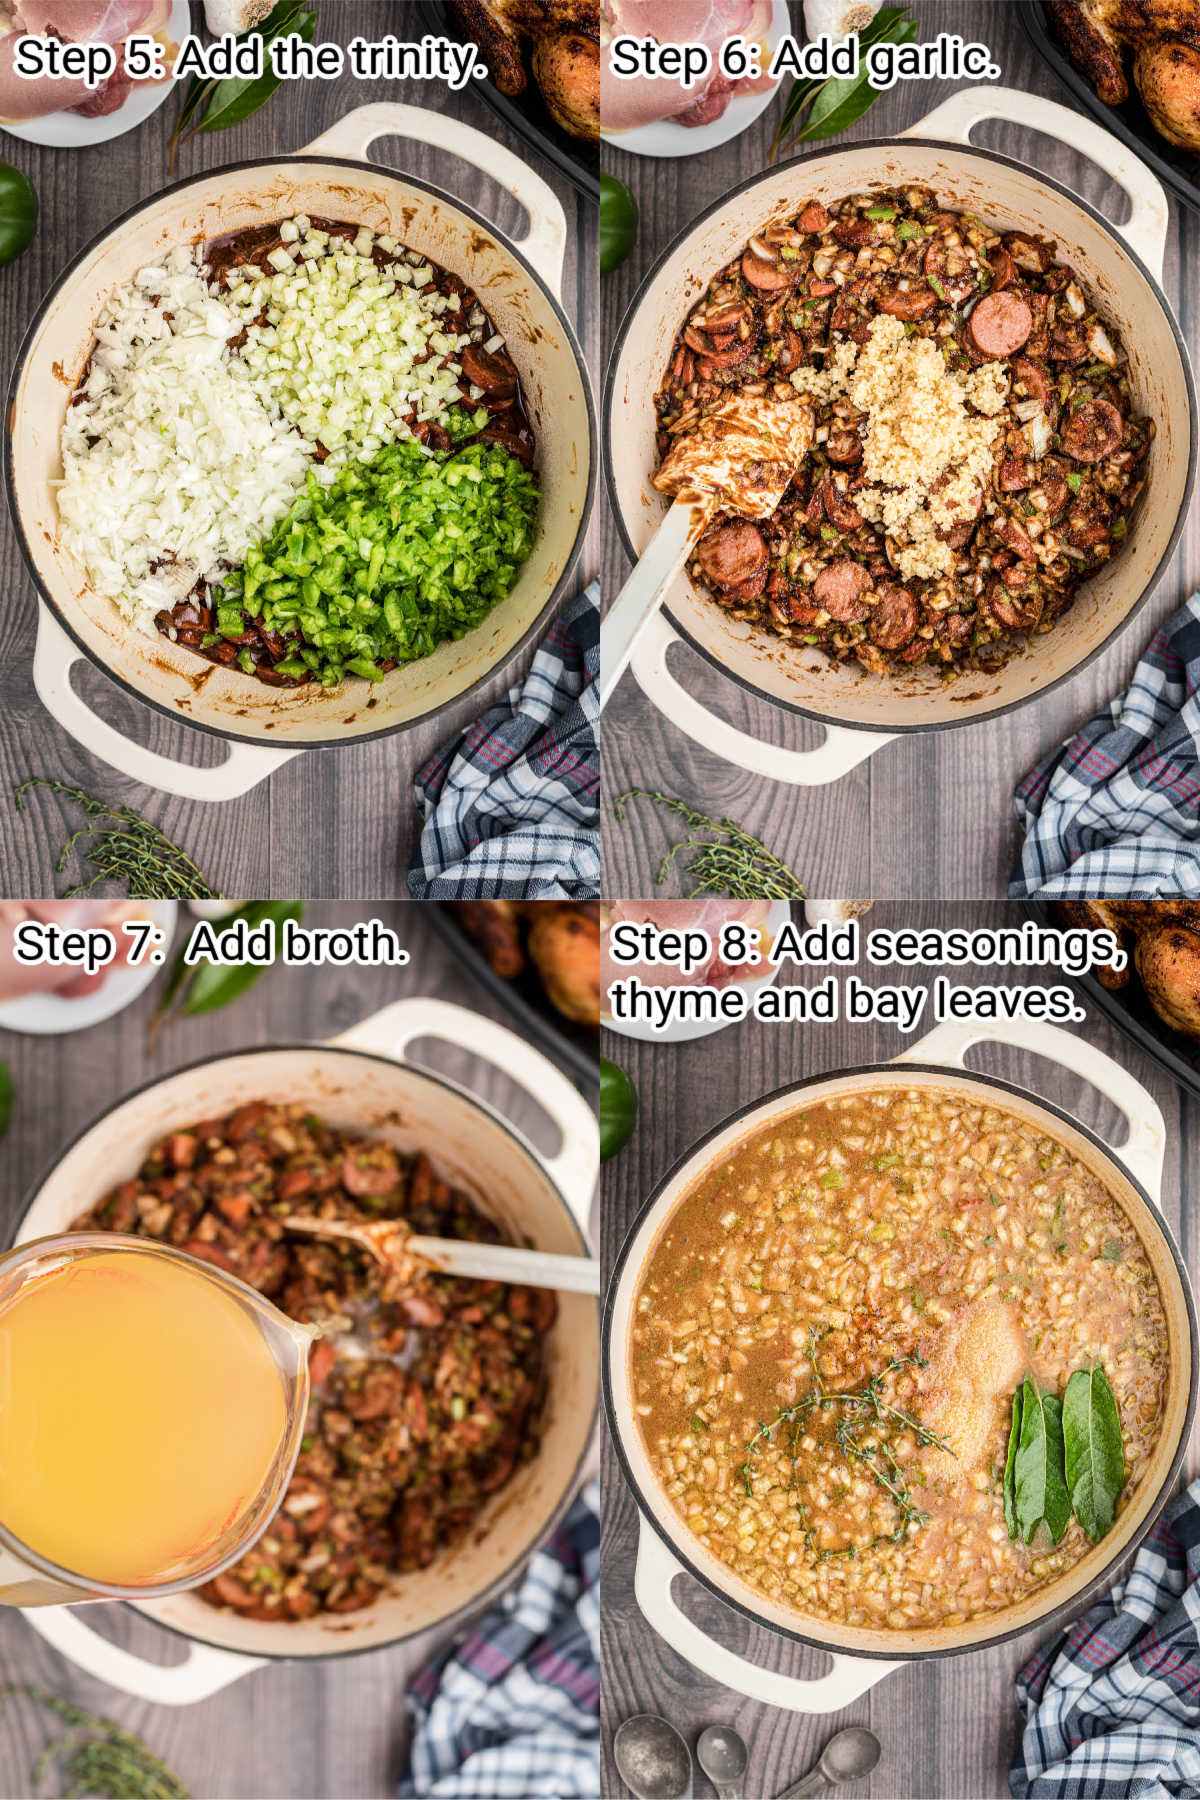 four images showing steps of how to make a chicken and sausage gumbo, this is steps 5 through 8.